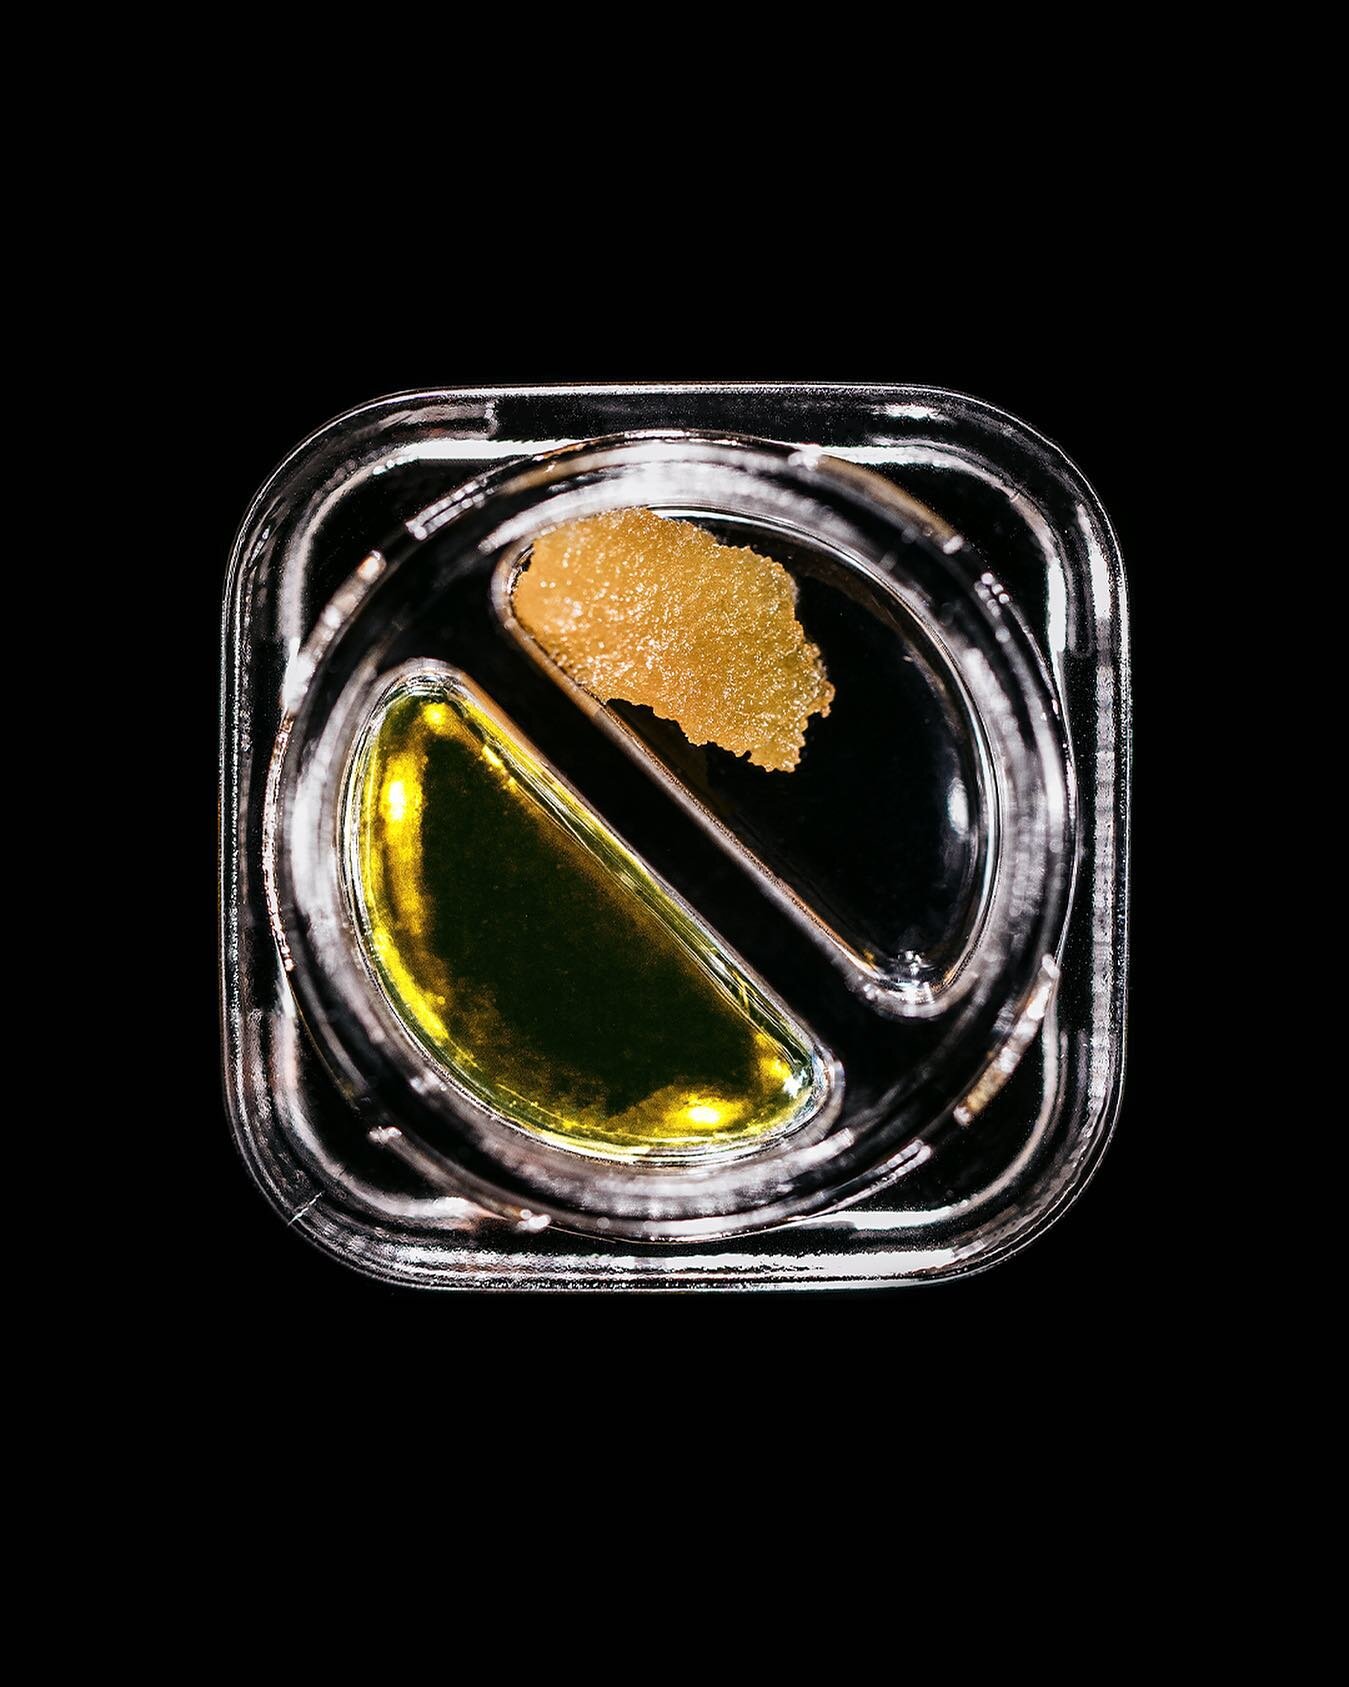 Check out our amazing Split Jar! 🌿🔬 

The cured resin extract is bursting with terpenes and boasts a smooth, flavorful experience. Meanwhile, the full spectrum extract offers a potent, full-bodied high that's sure to leave you feeling relaxed and e